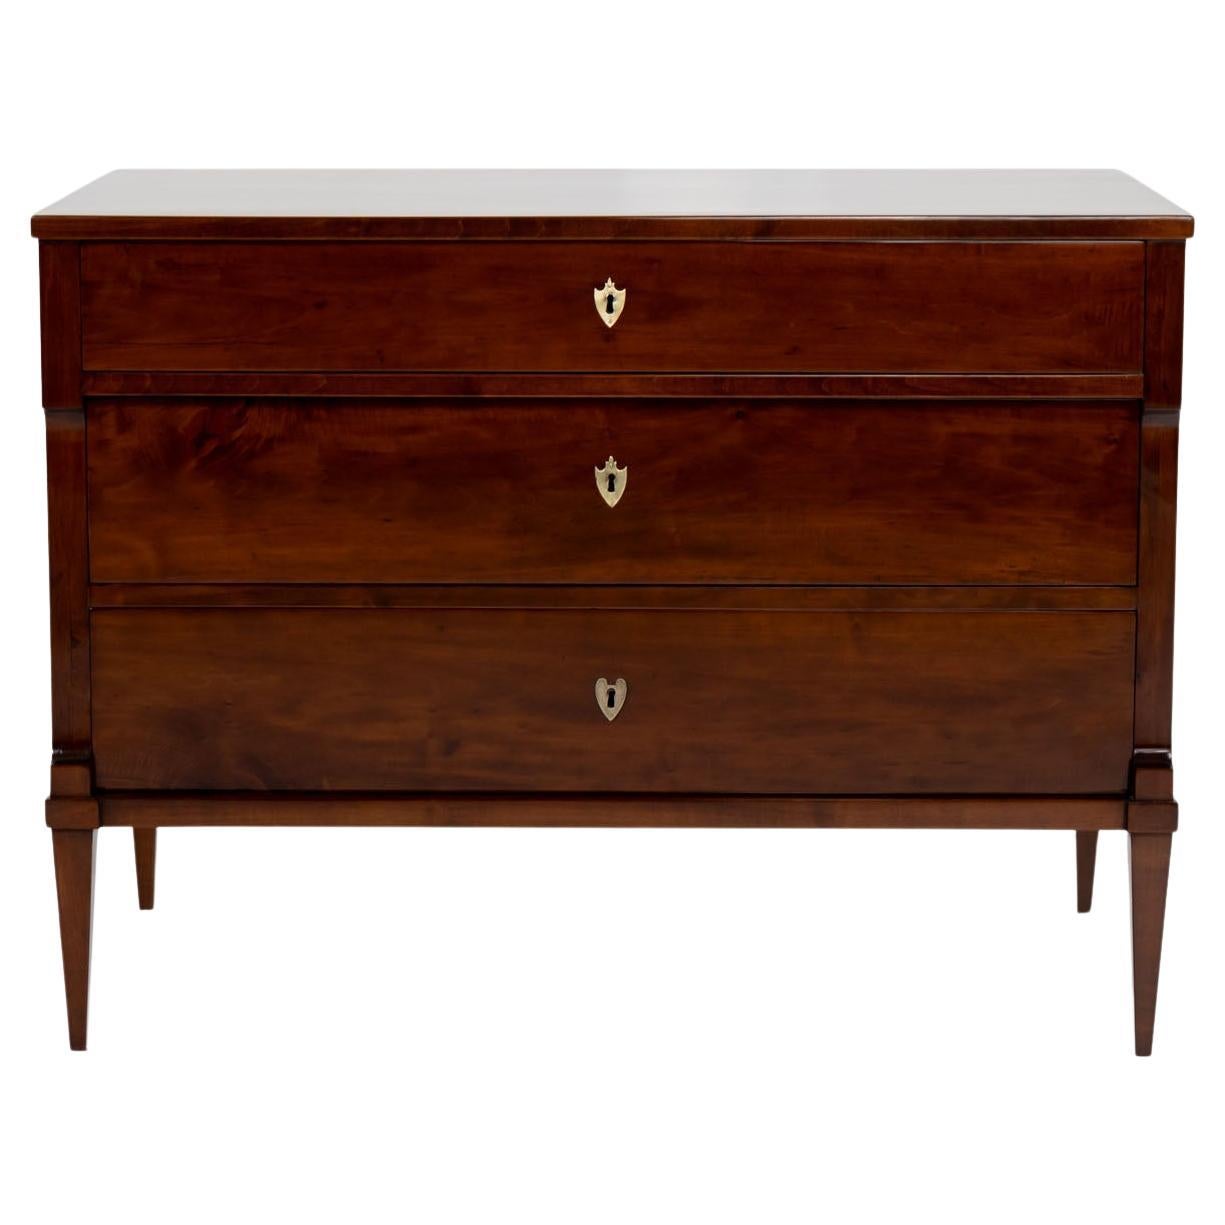 Neoclassical Chest of Drawers, early 19th Century For Sale